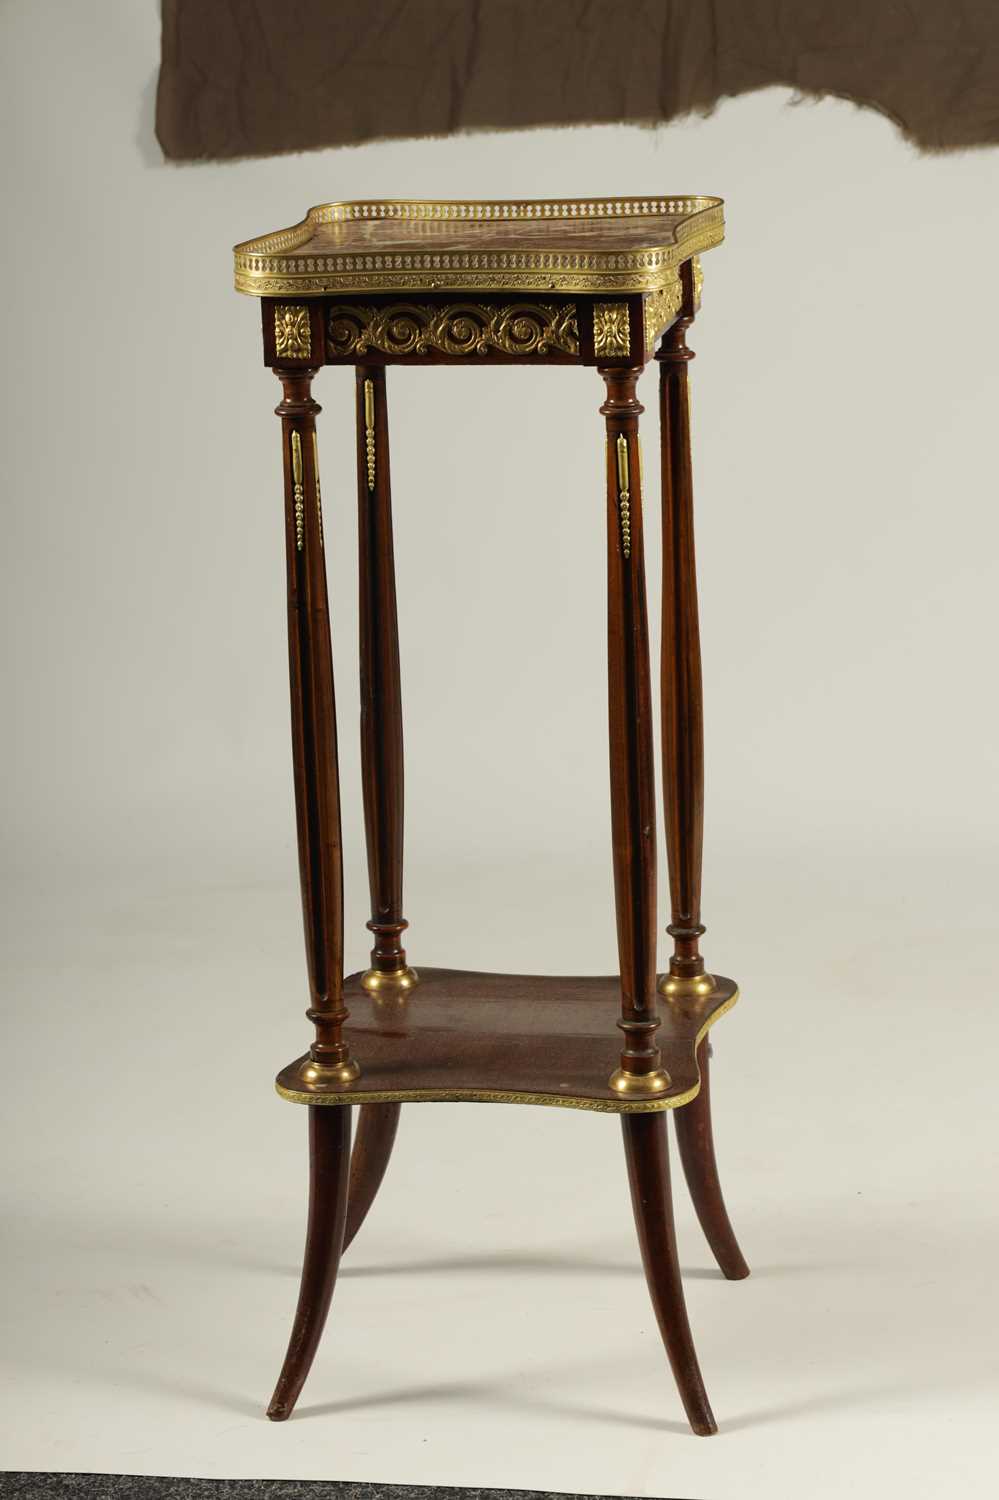 A 20TH CENTURY FRENCH GILT BRASS MOUNTED MAHOGANY SHAPED JARDINIERE STAND - Image 3 of 8